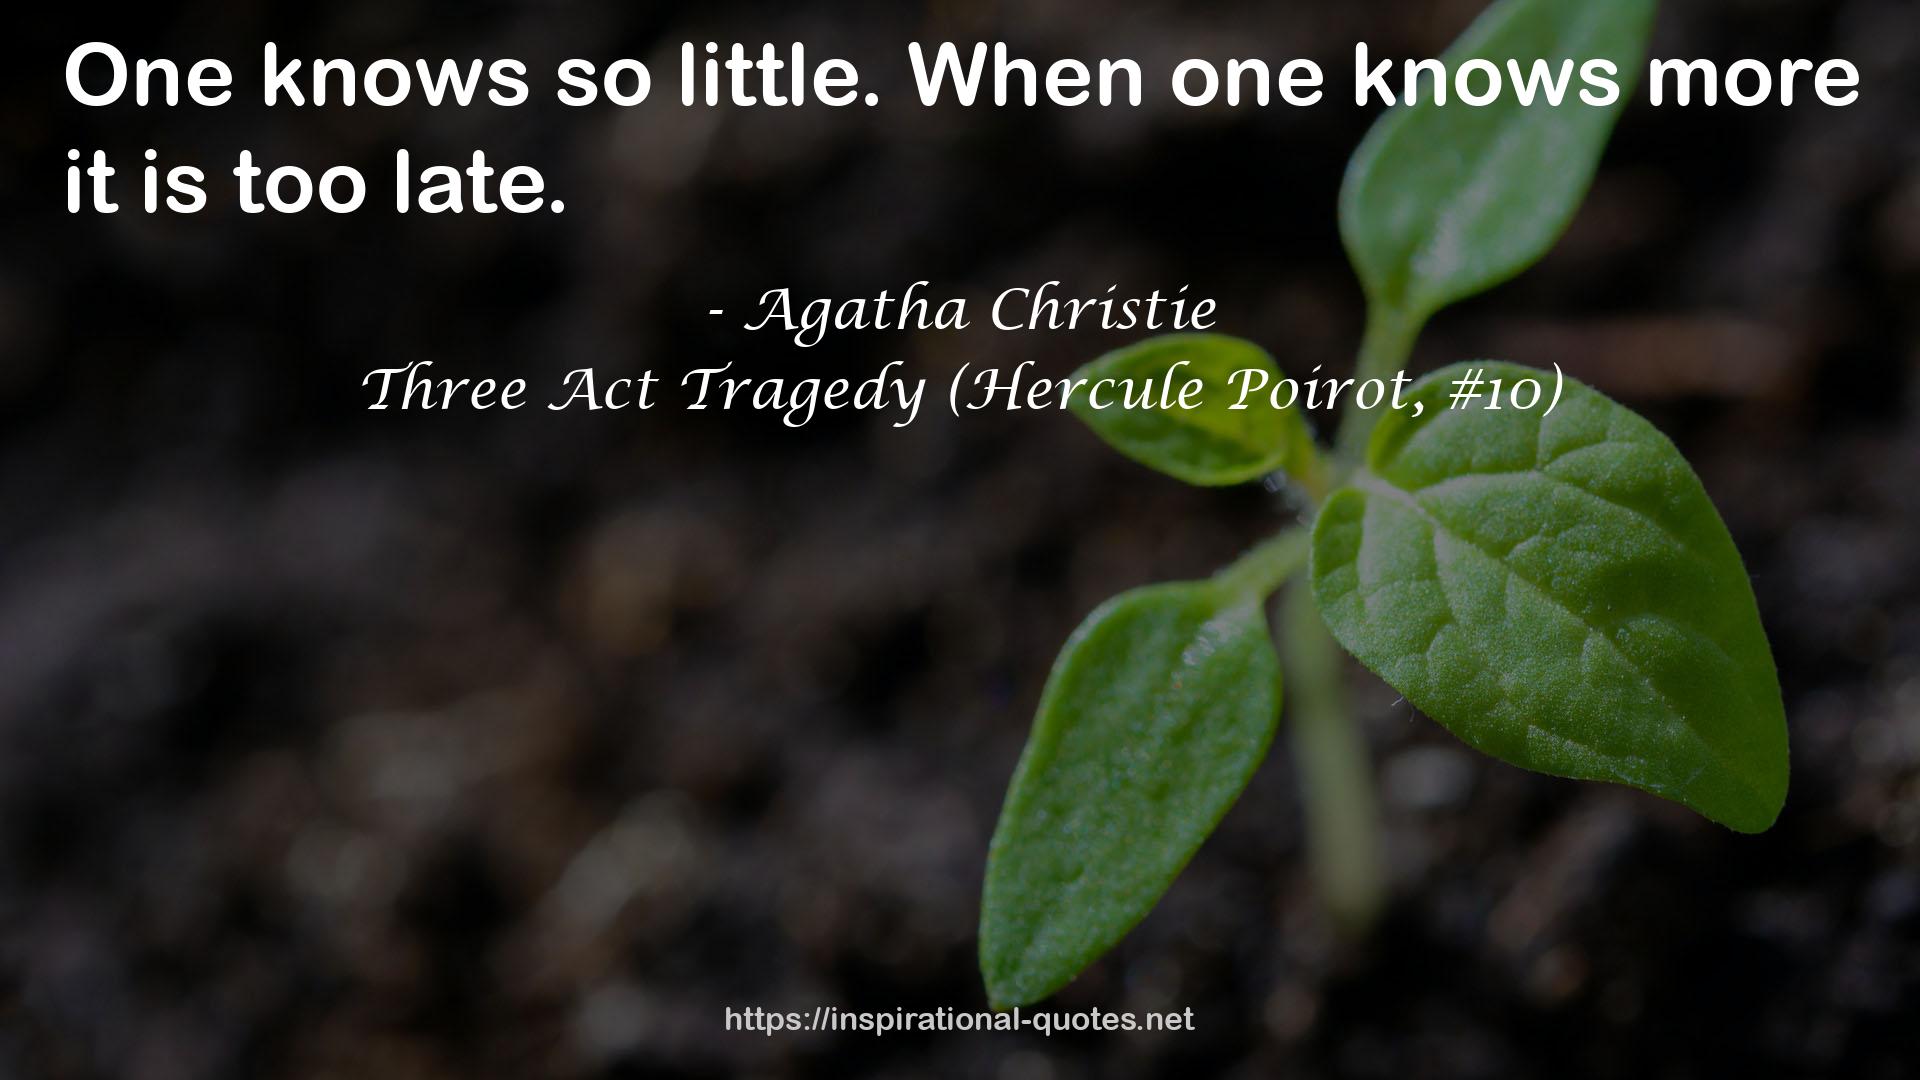 Three Act Tragedy (Hercule Poirot, #10) QUOTES